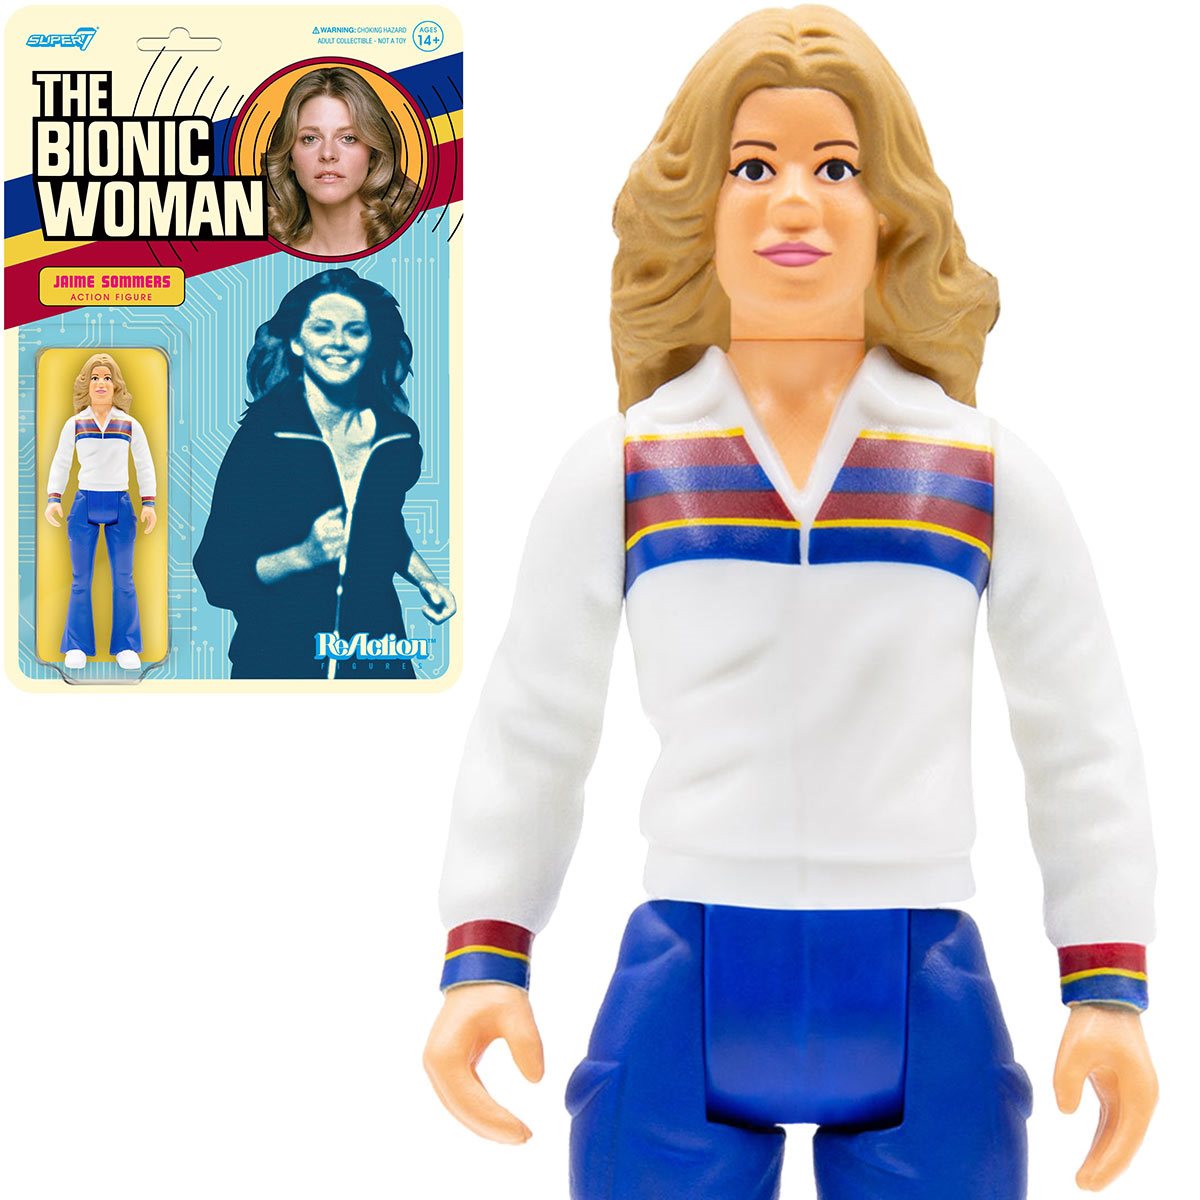  Super7 The Bionic Woman Jamie Sommers - 3.75 The Bionic Woman  Action Figure Classic TV Show Collectibles and Retro Toys : Toys & Games